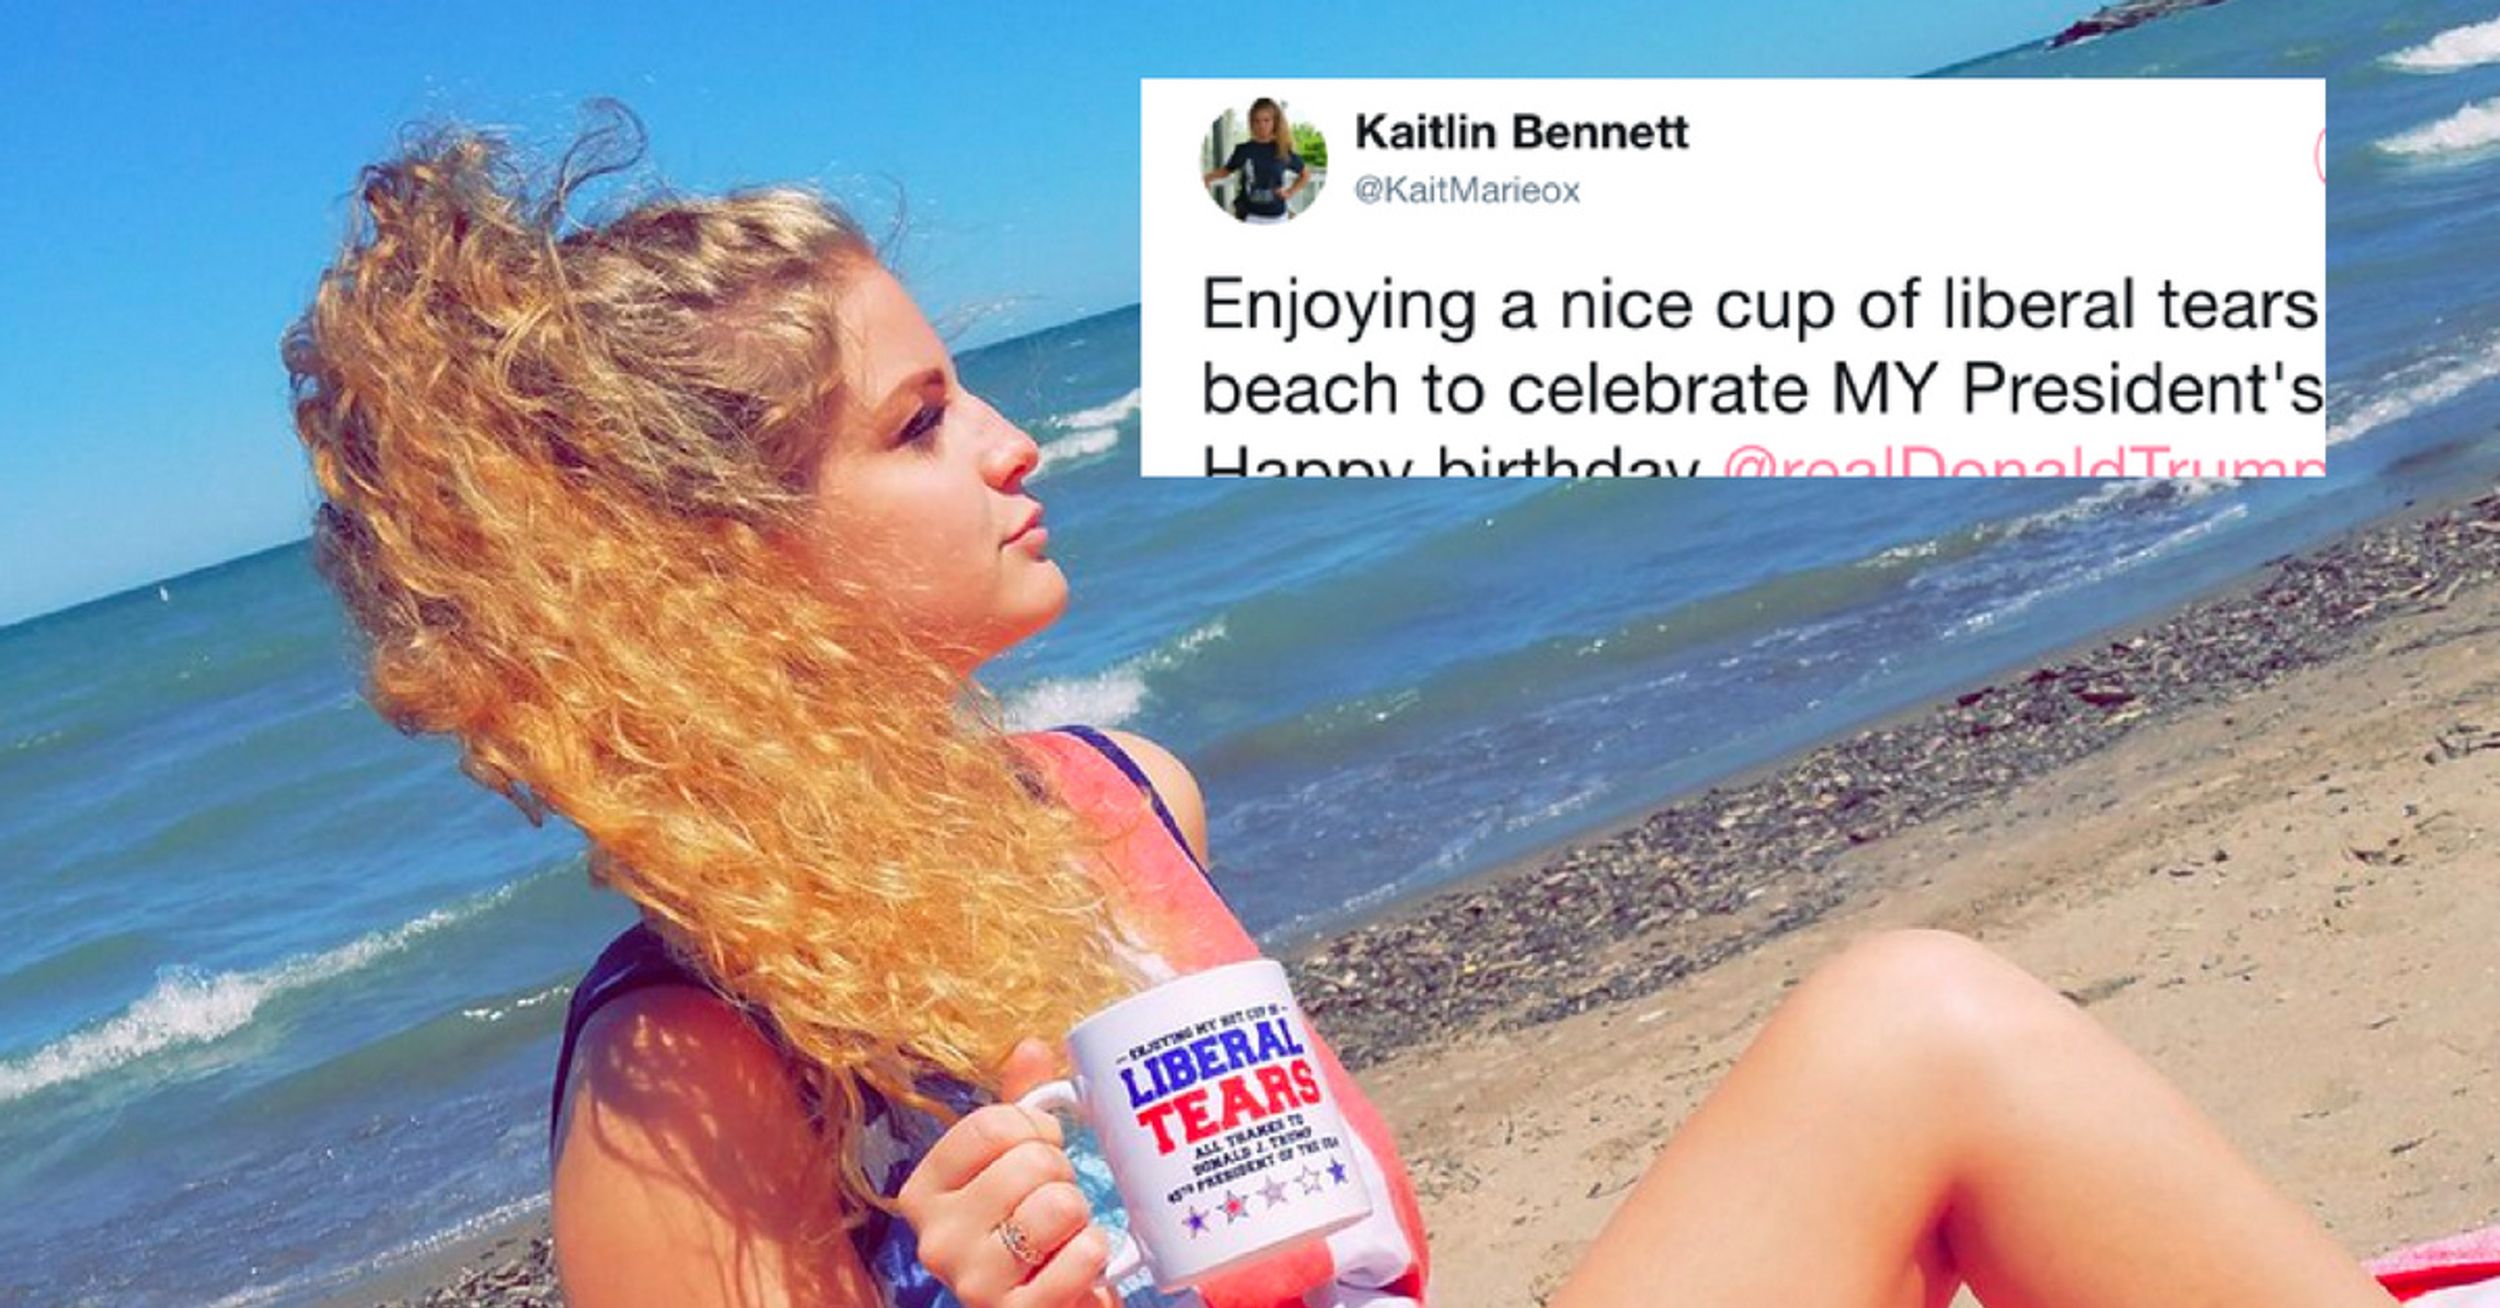 That Gun-Loving College Student Just Unknowingly Disrespected The Flag In A Pro-Trump Selfie